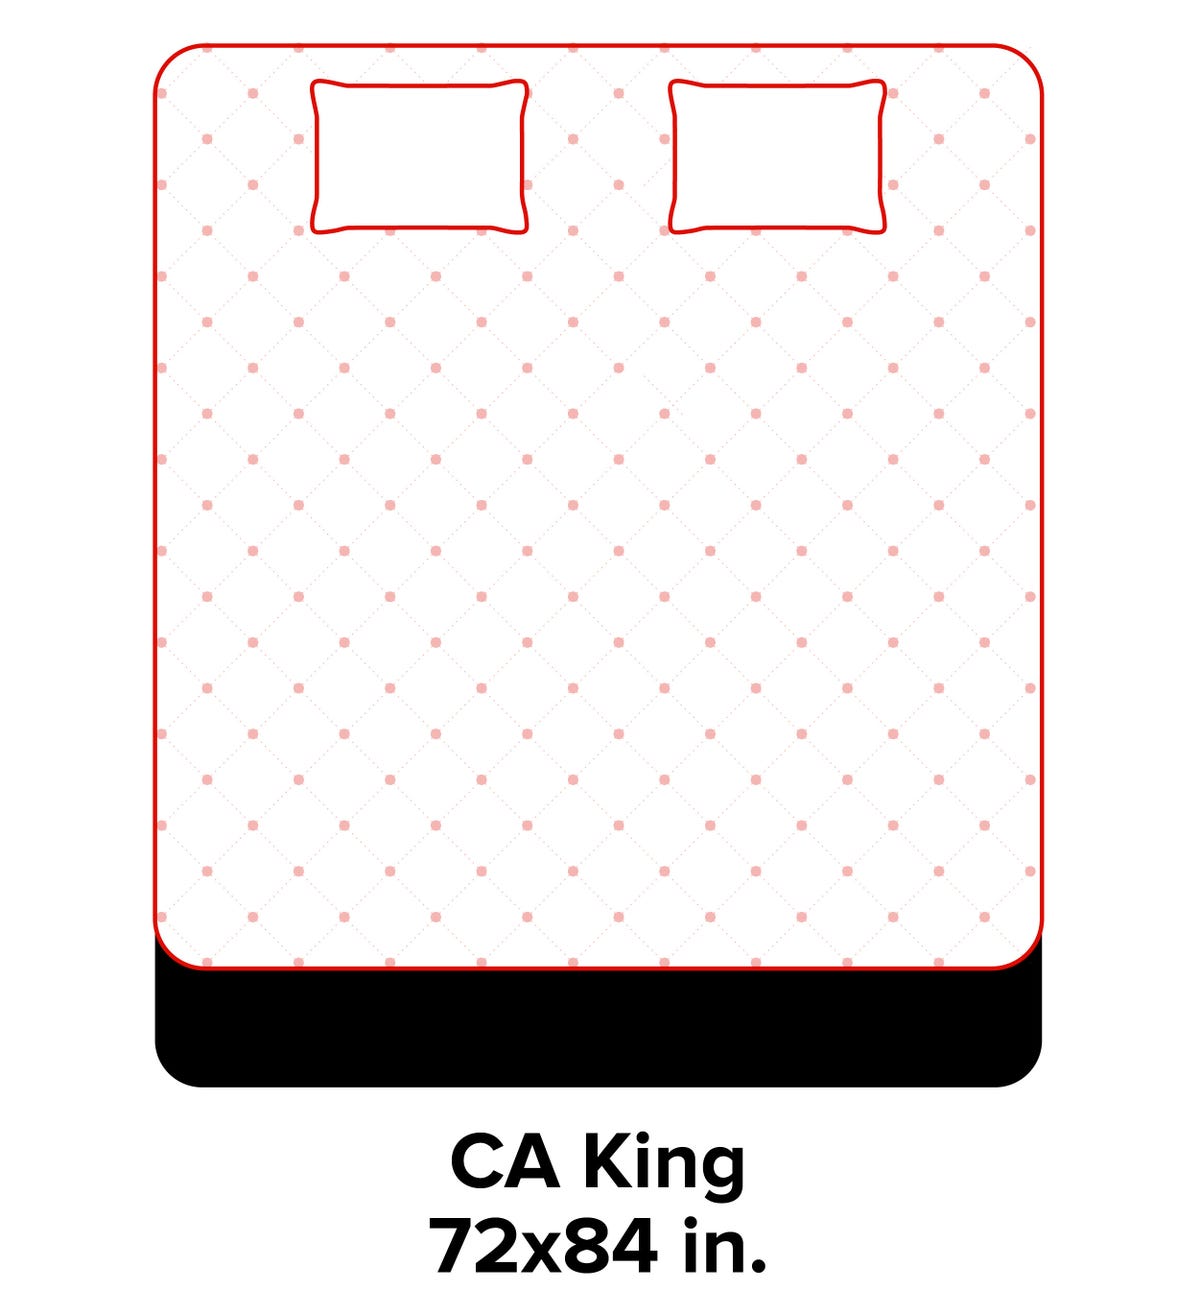 mattress-size-guide-graphic-cnet-ca-king